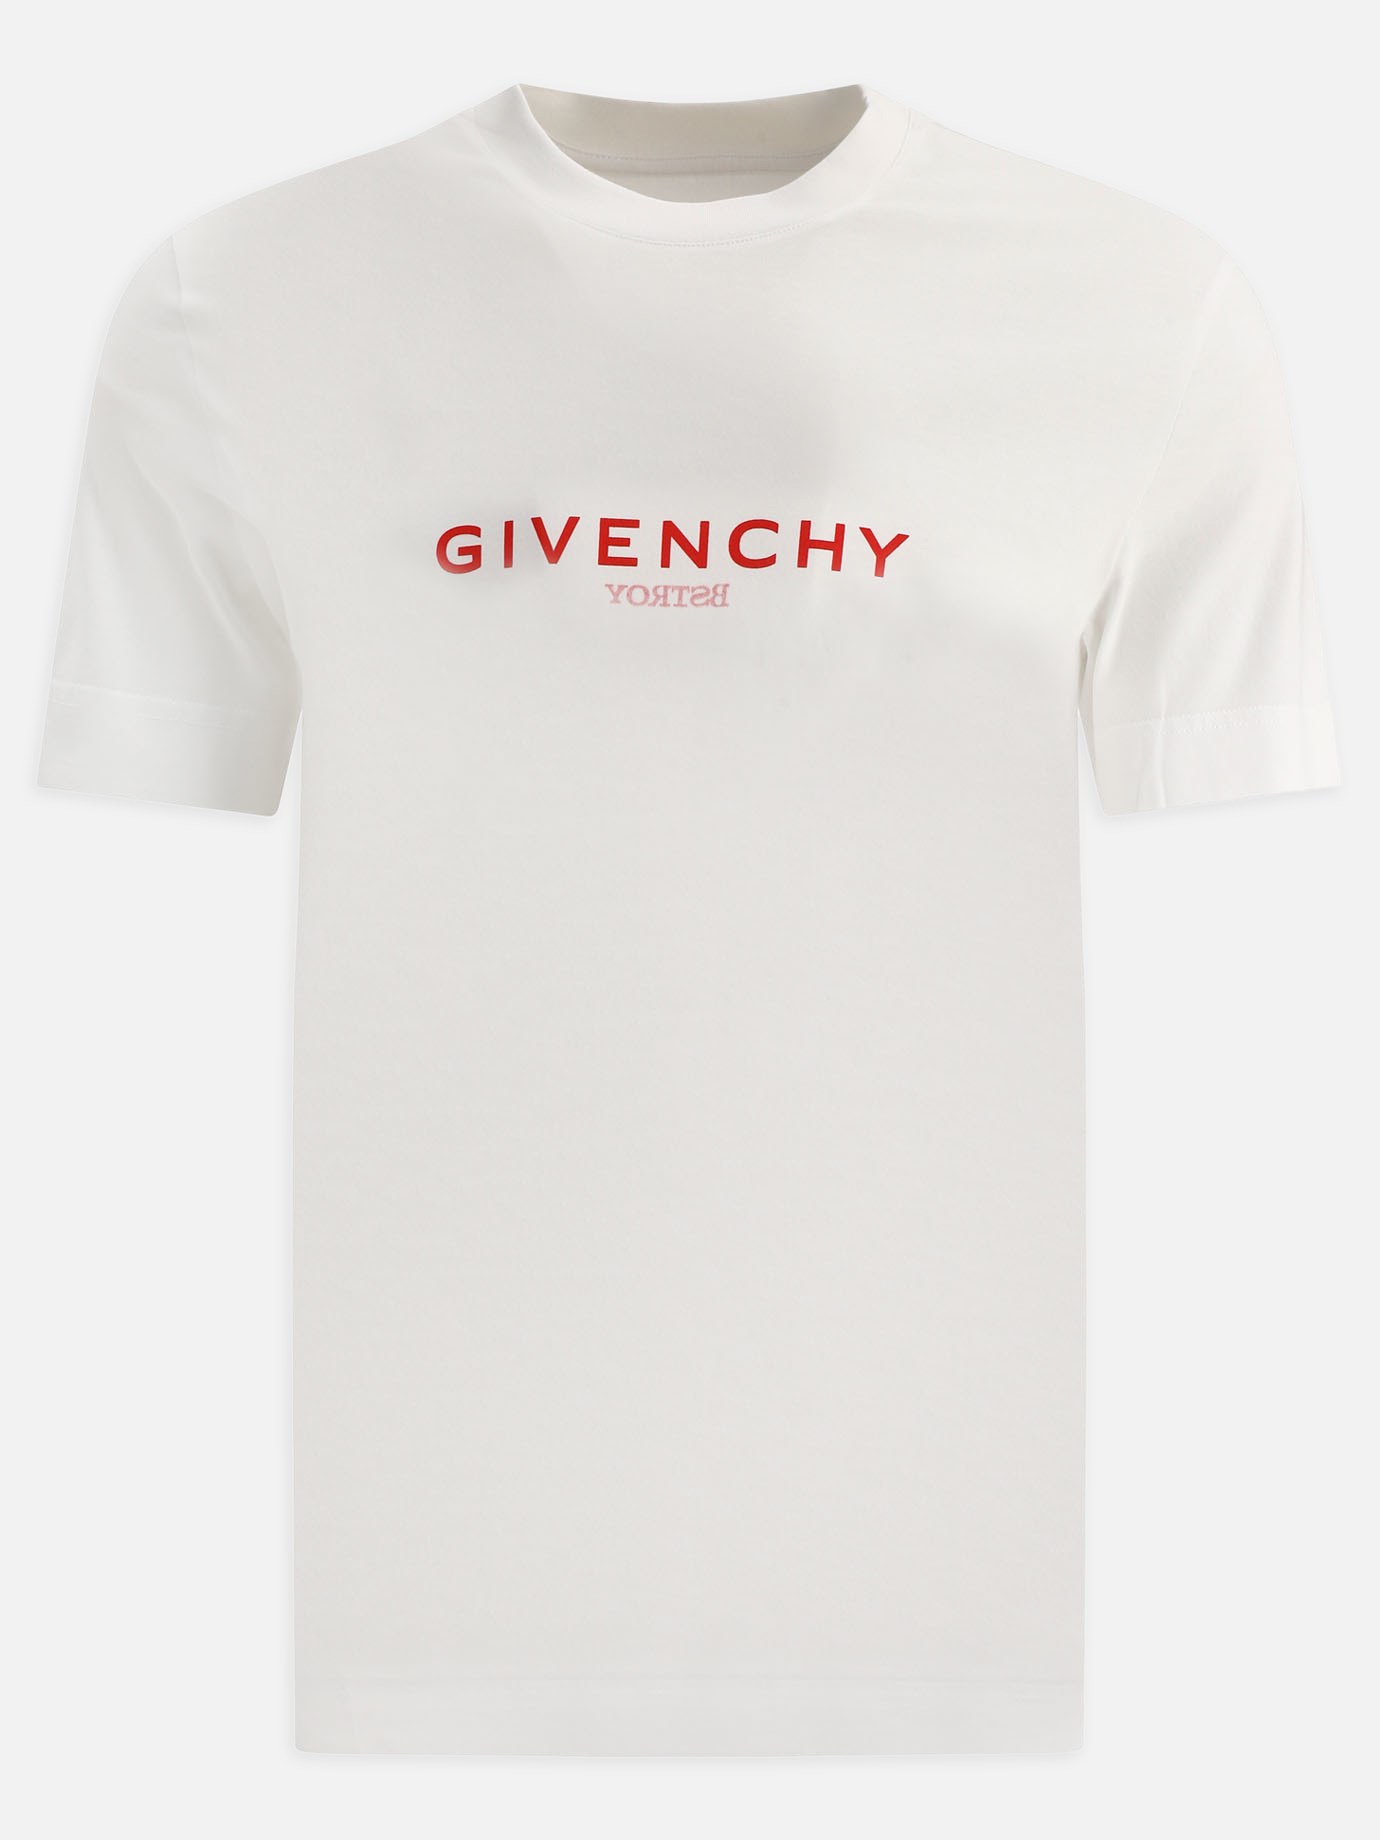 T-shirt reverse  BSTROY x Givenchy by Givenchy - 4